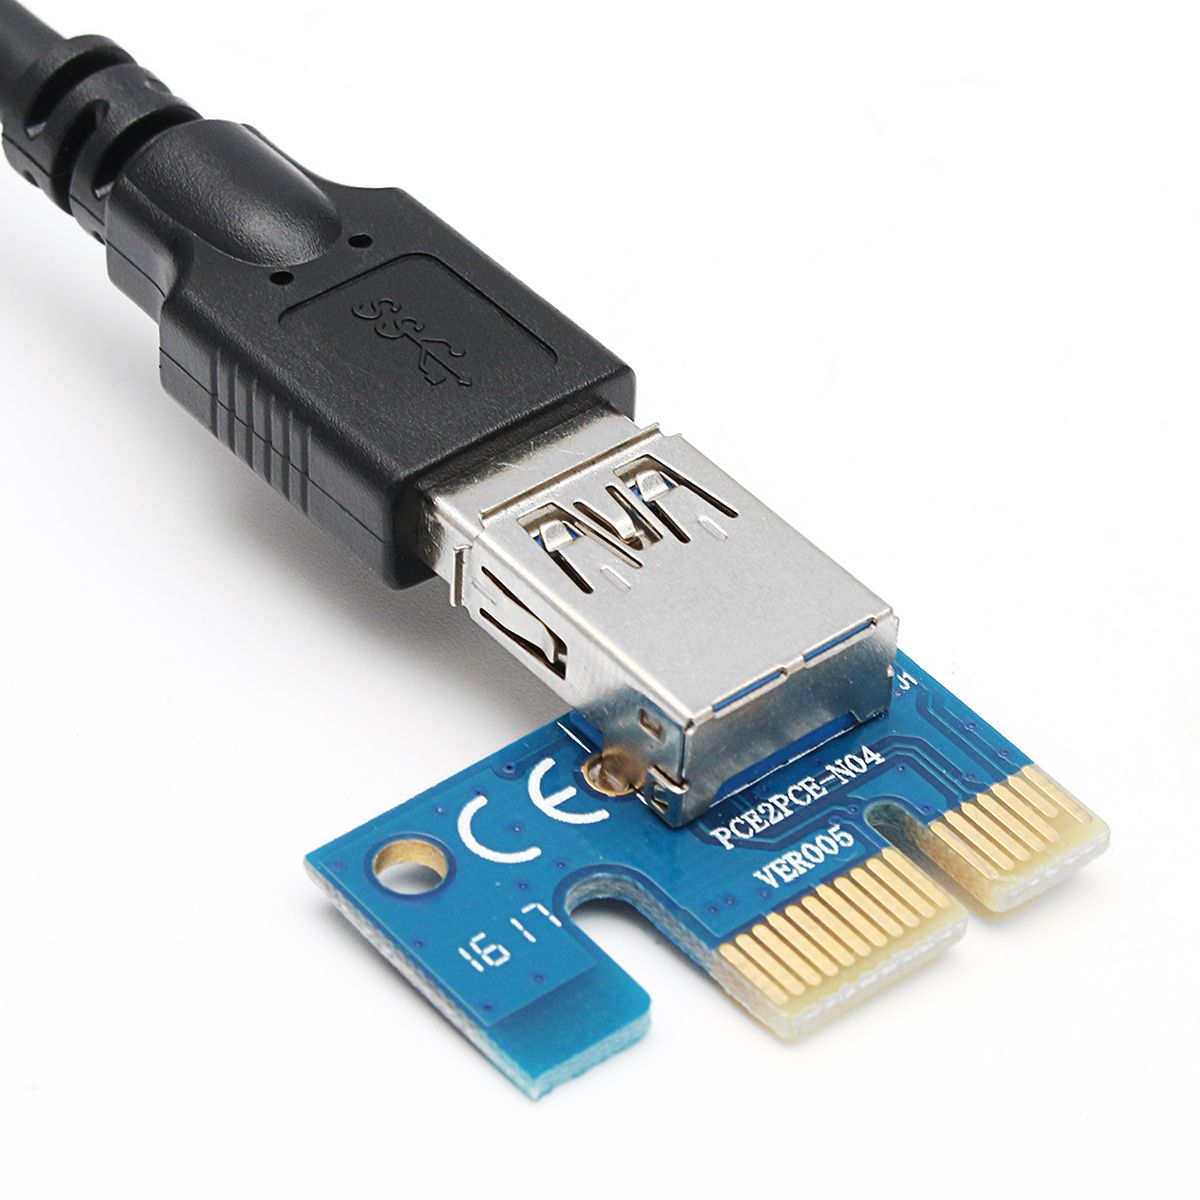 06m-USB30-PCI-E-1x-To16x-Extender-Riser-Card-Adapter-Extension-Power-Cable-For-ETH-GPU-Mining-1167988